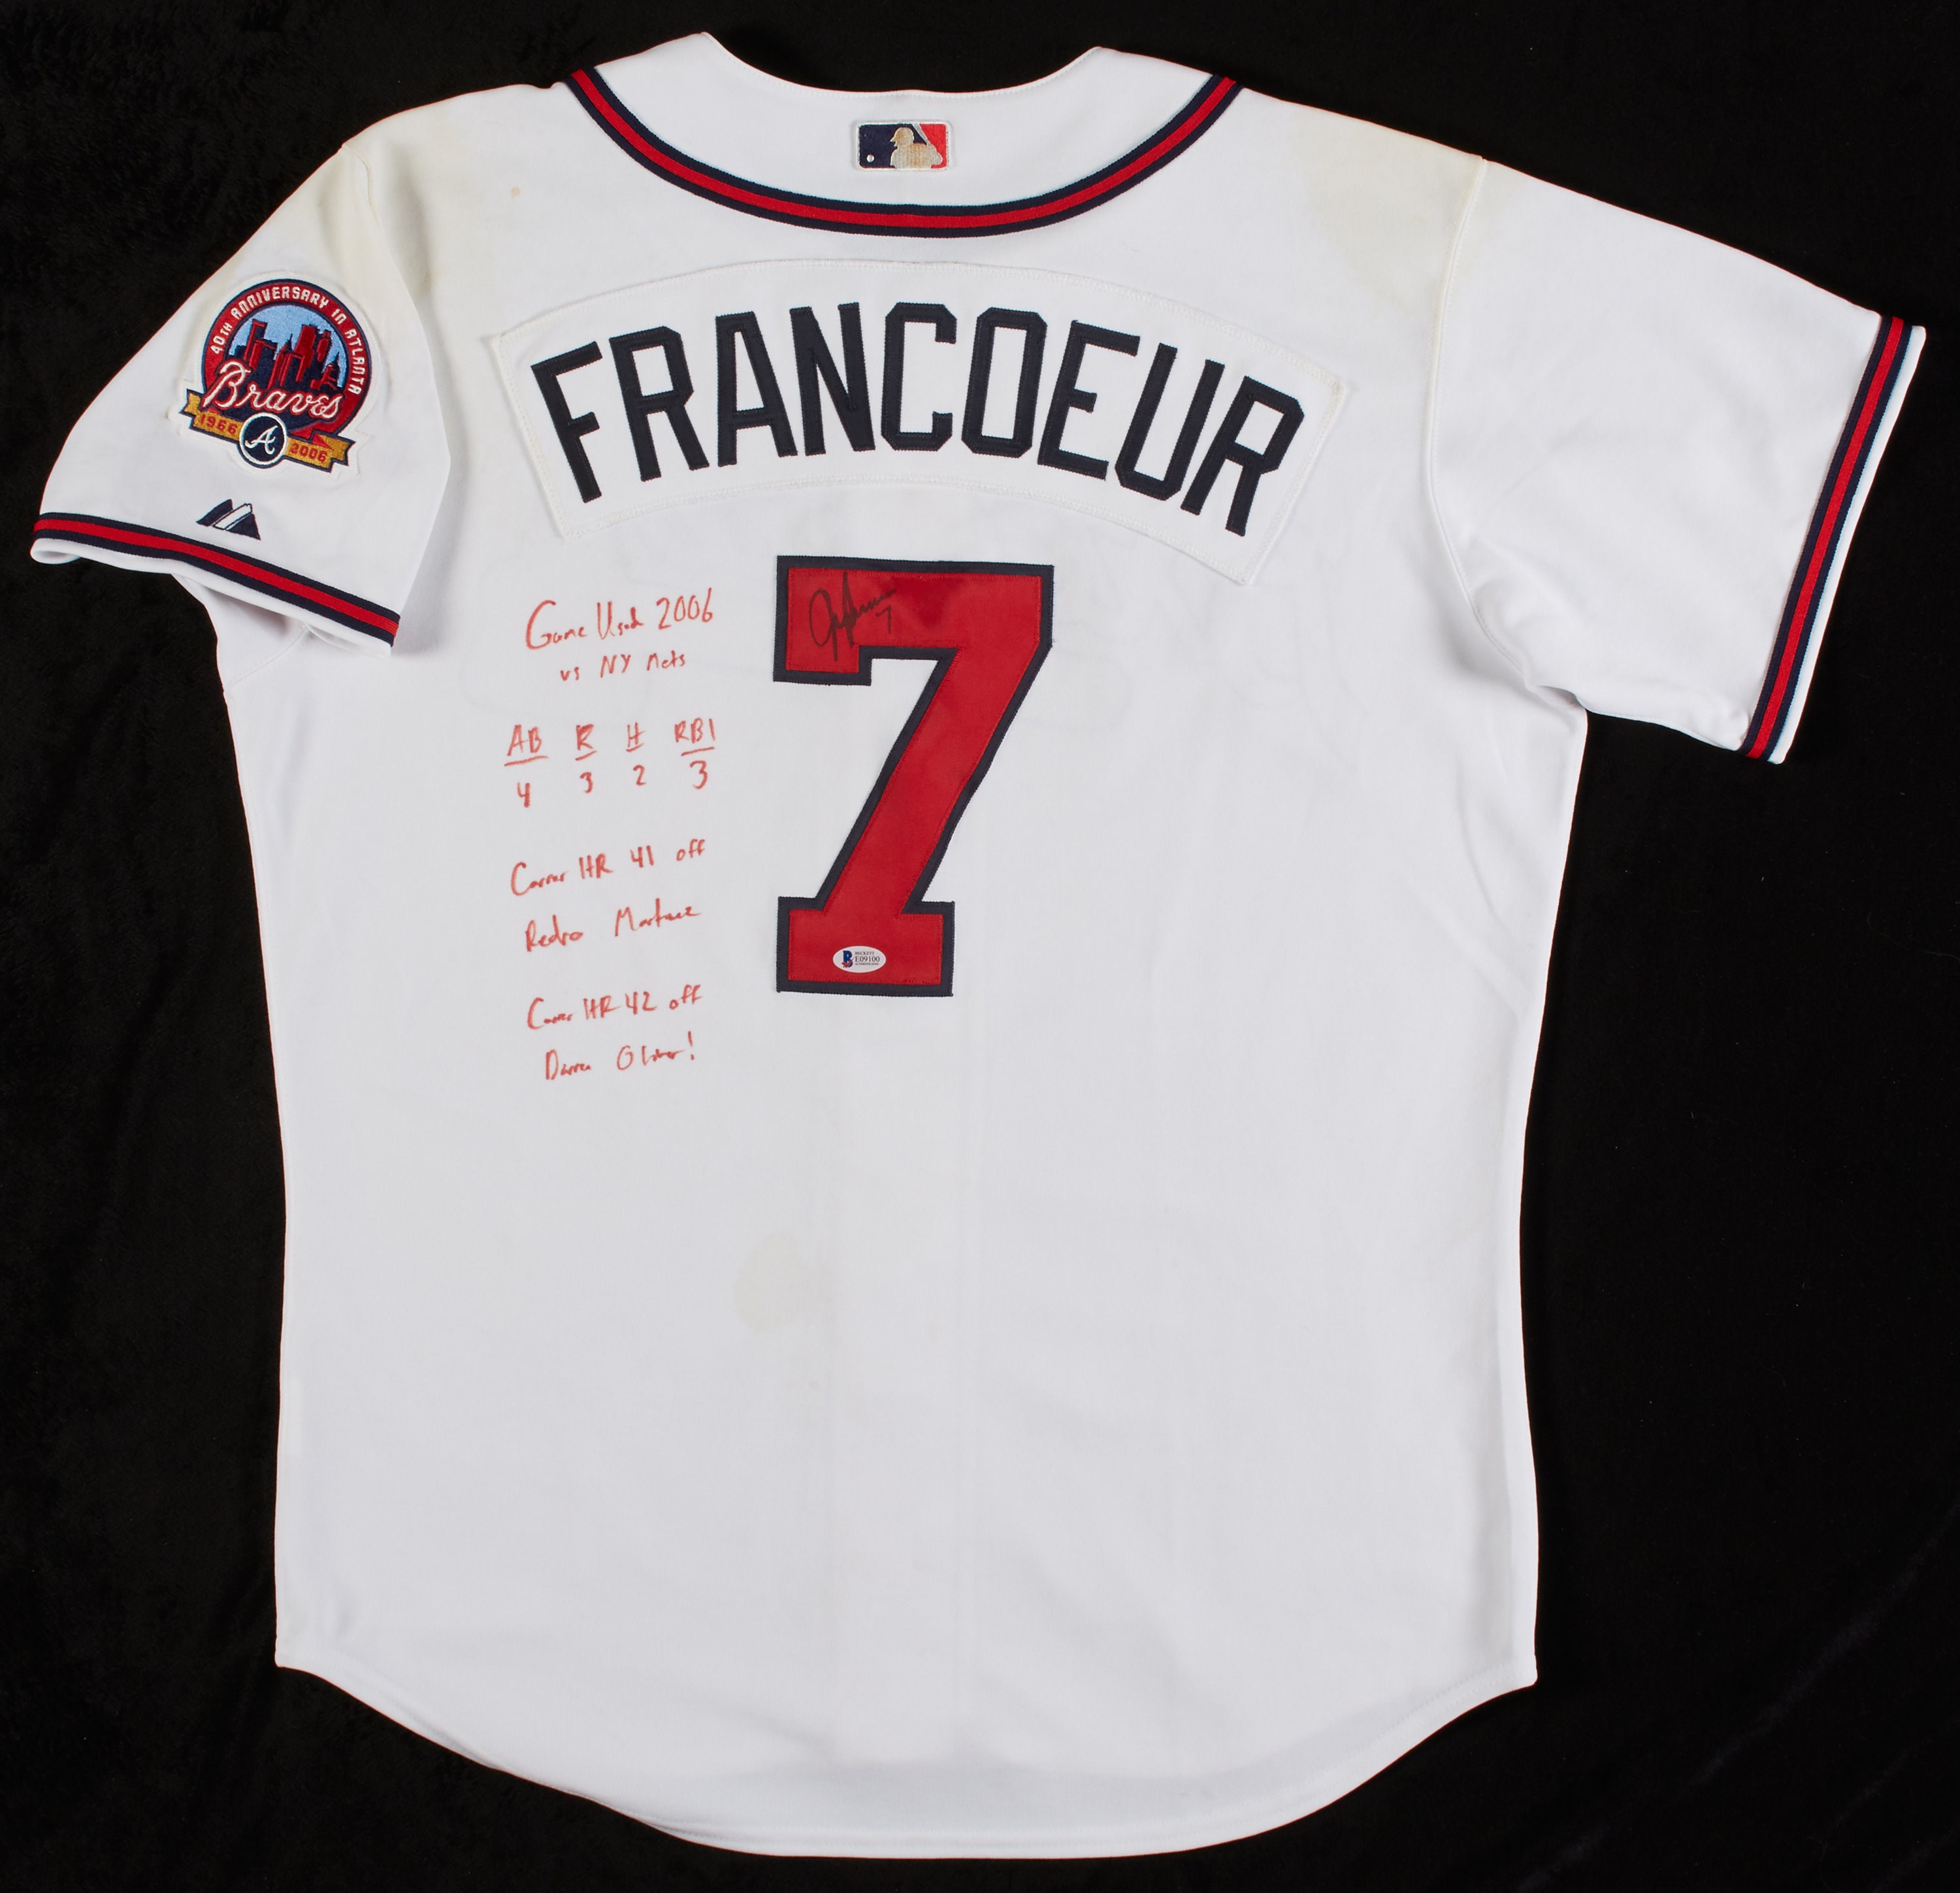 - 9/27/06 Jeff Franceour 2-Home Run Game Worn Jersey - Career HRs #41 & #42 (Heavily Signed and Inscribed)